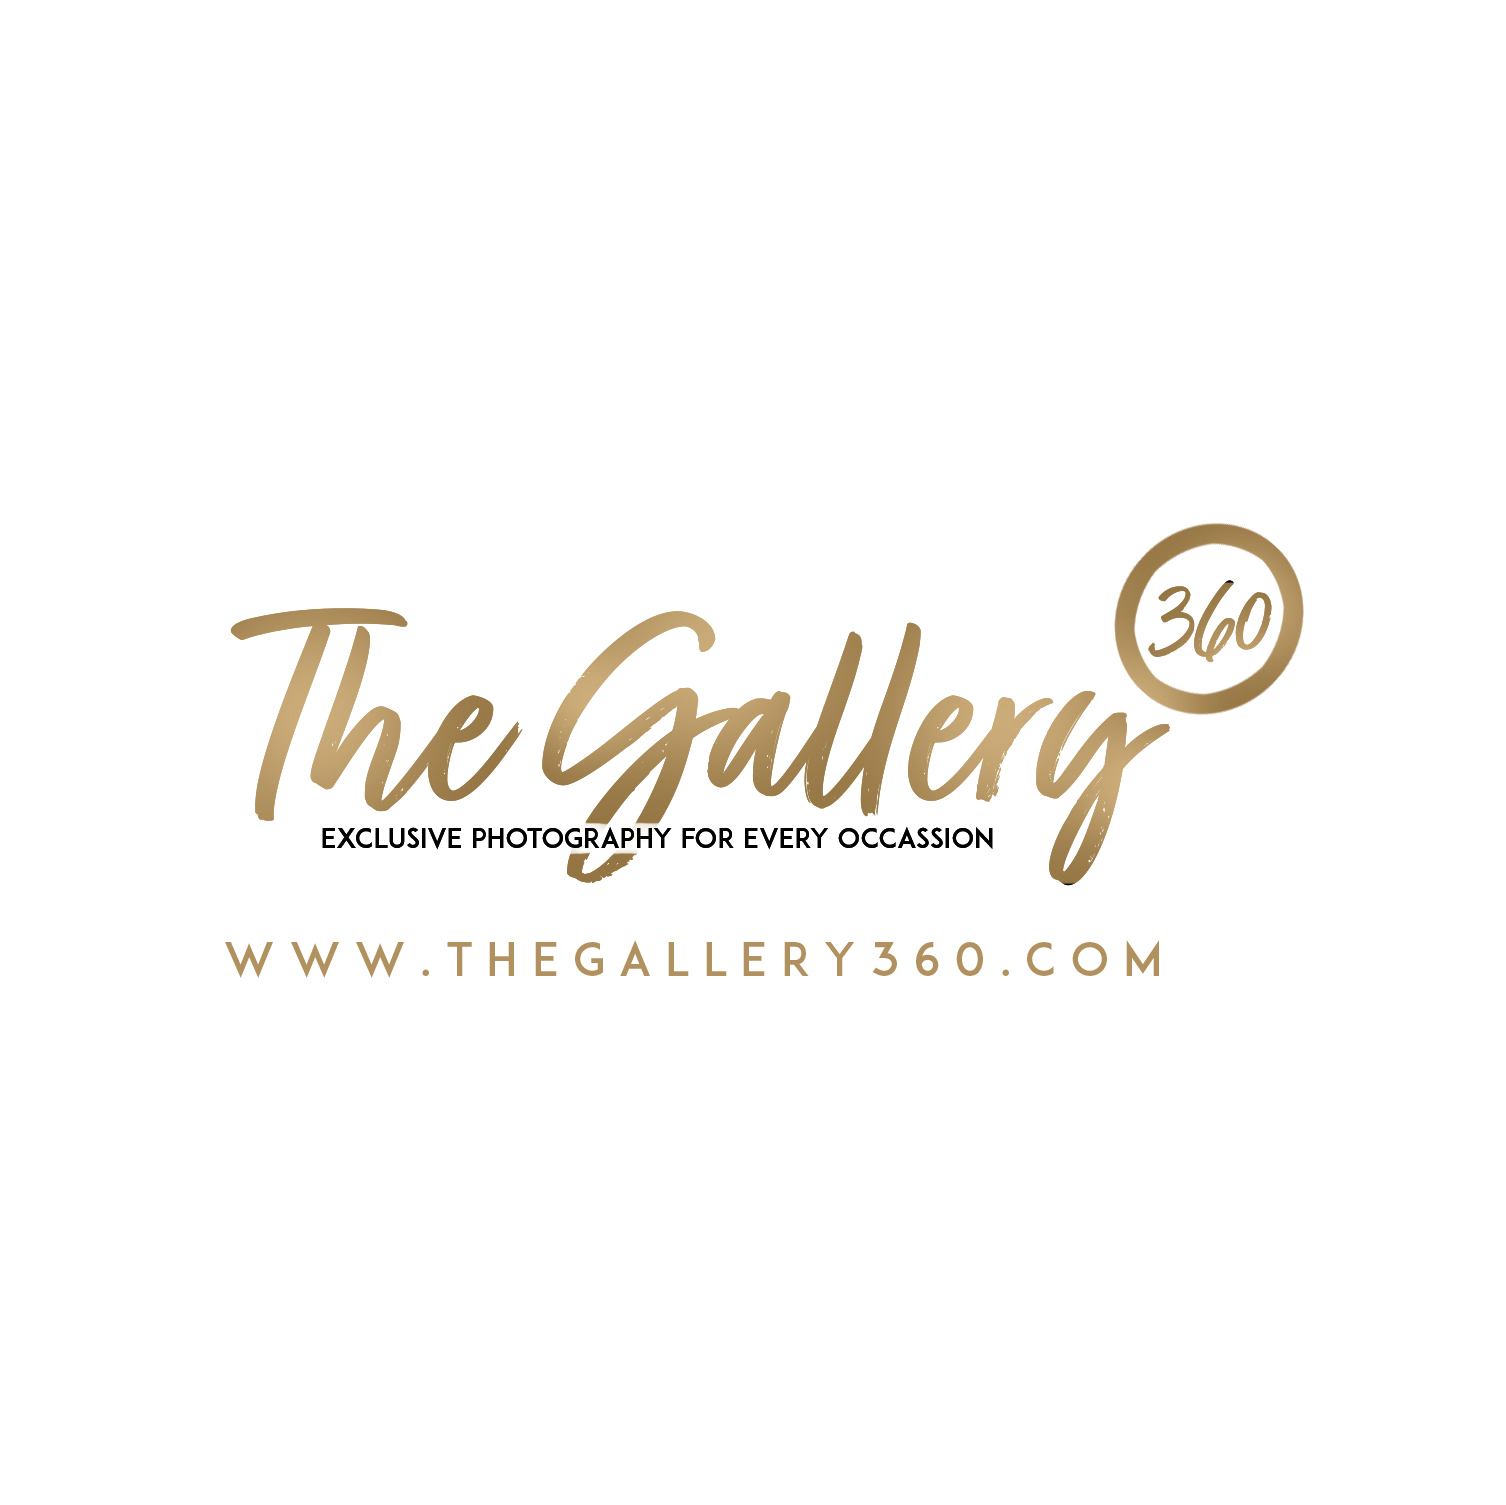 Ascano Photography/The Gallery 360